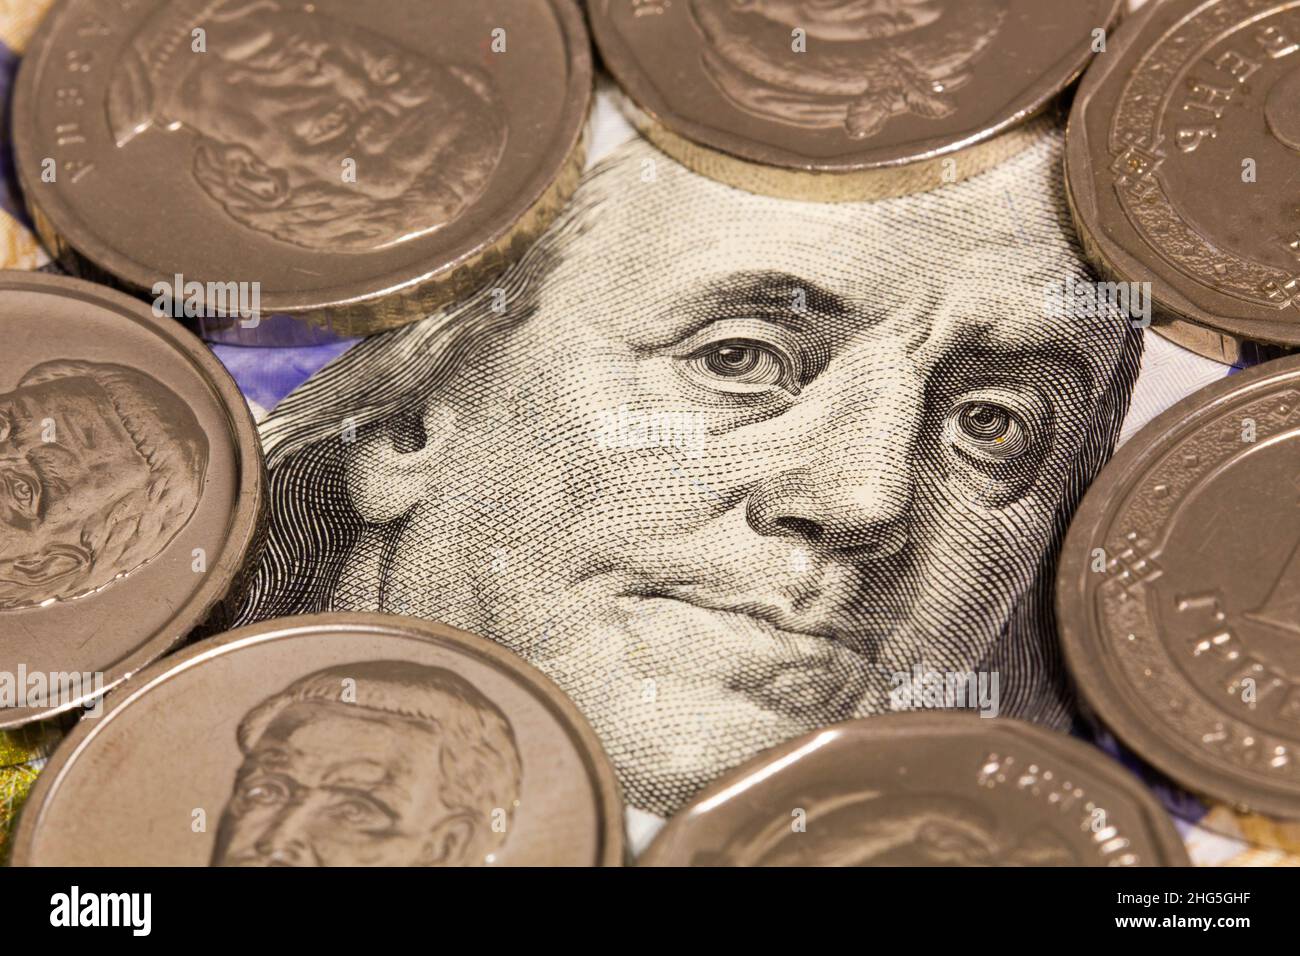 100 dollars banknote and white coins. A portrait of Roosevelt Franklin on a hundred dollar bill framed by silver coins. Money concept for financial Stock Photo